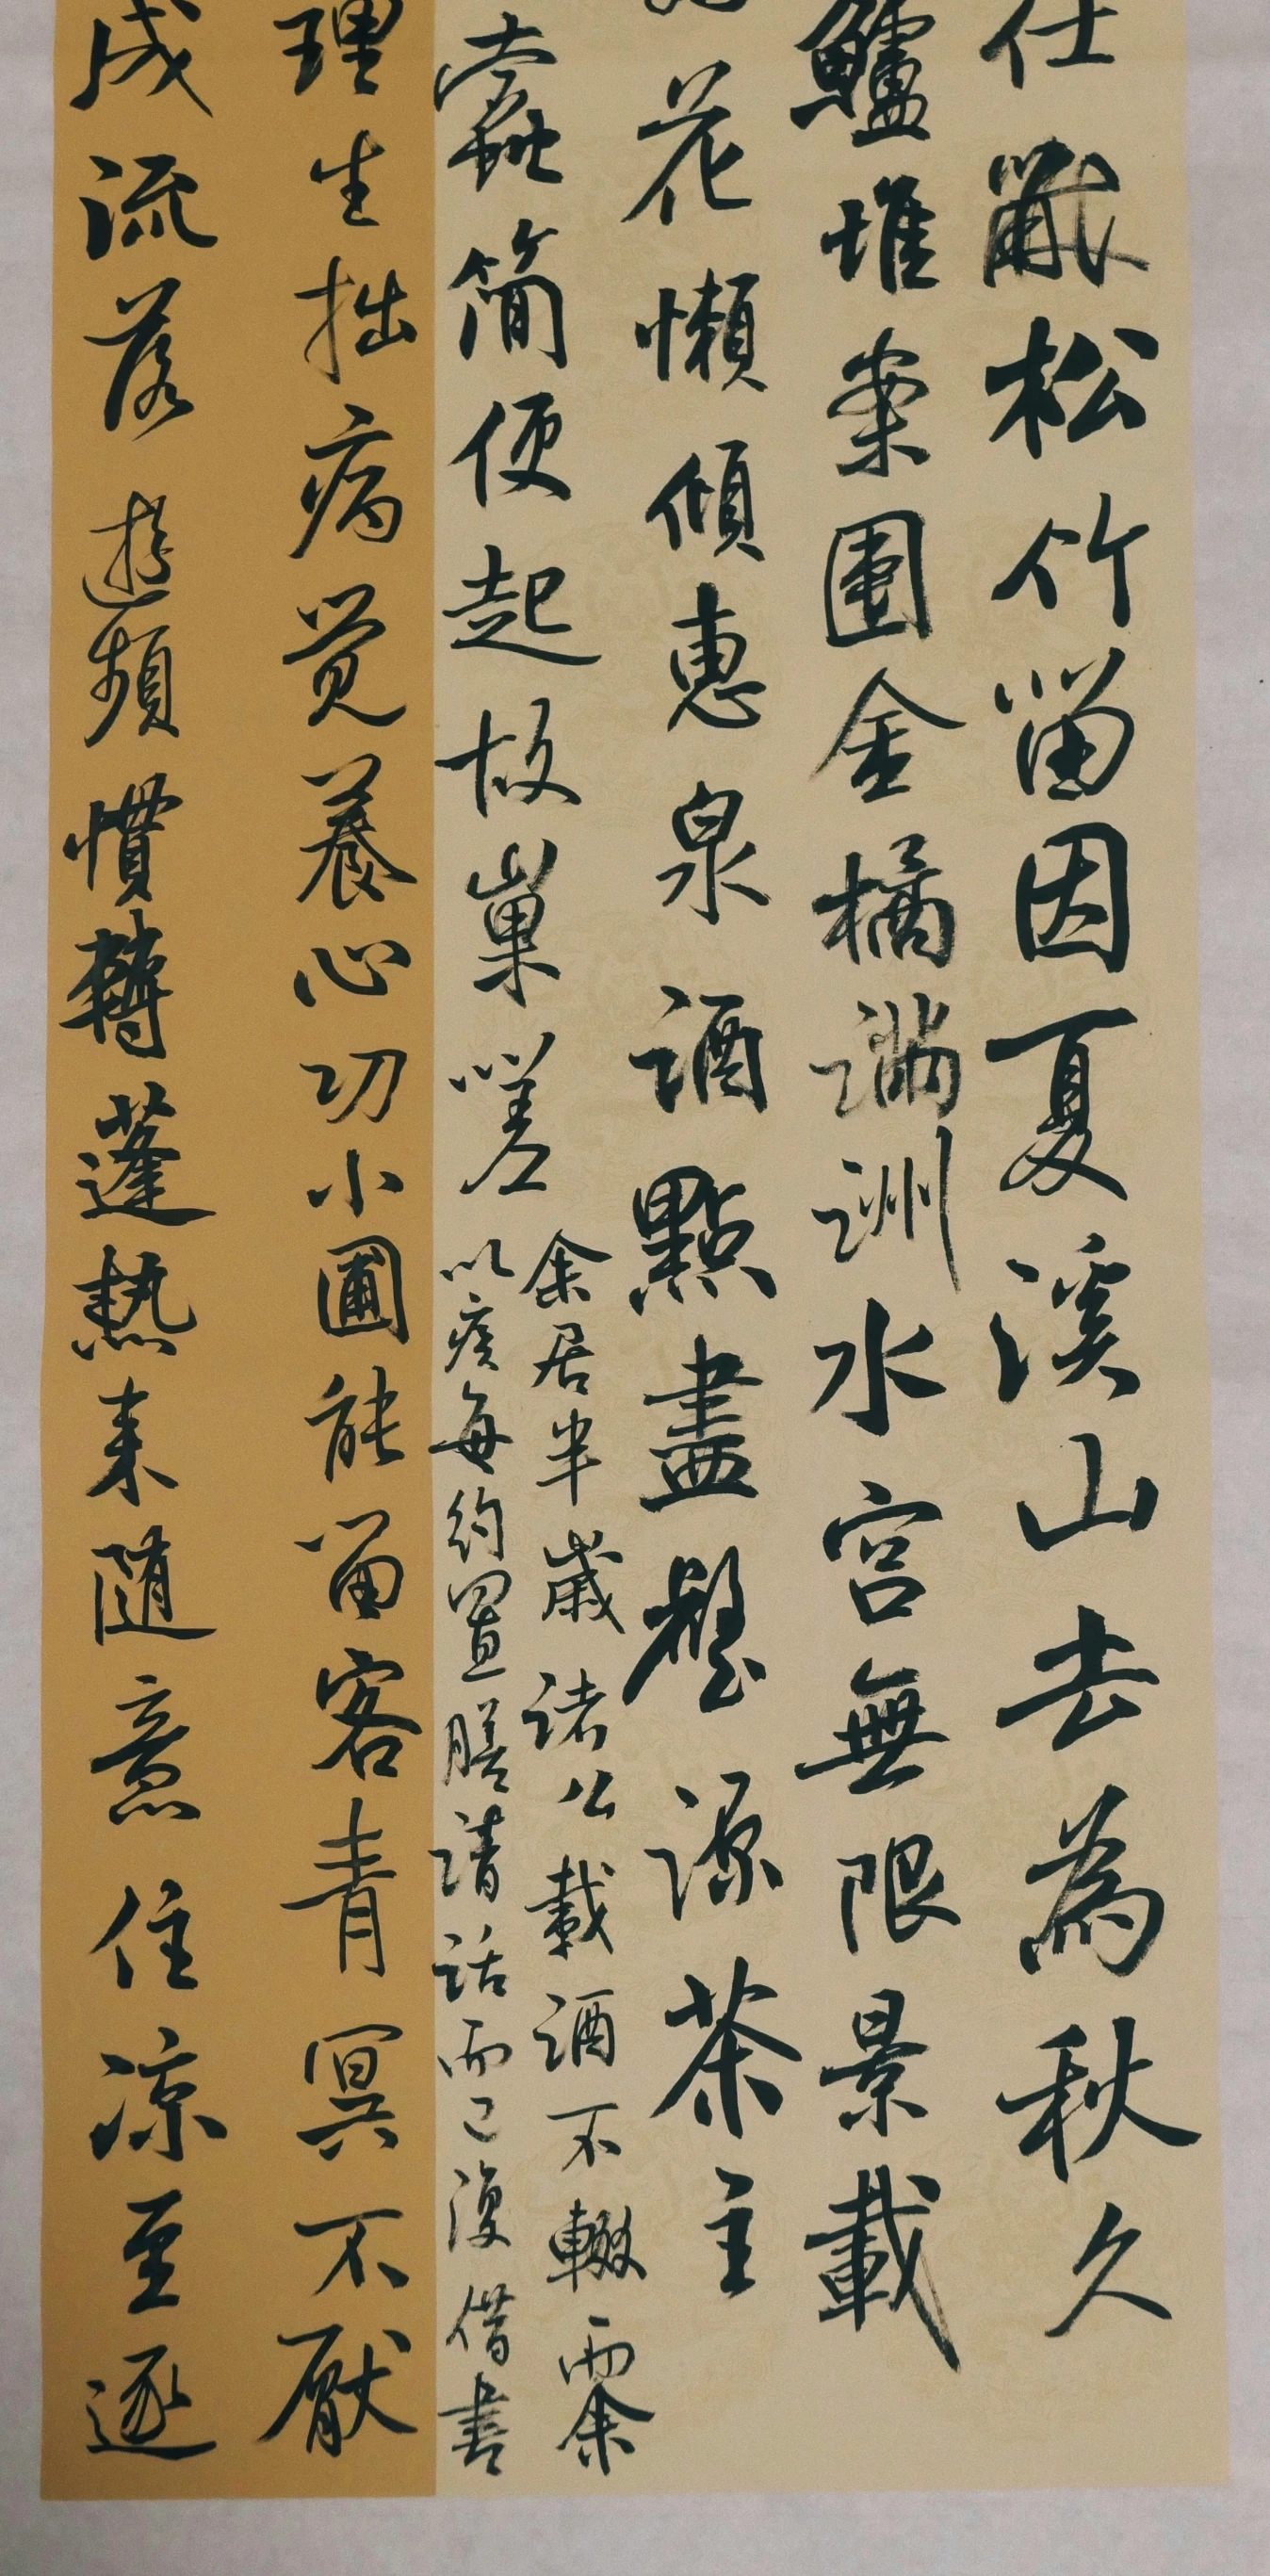 there are chinese writing on the large scroll